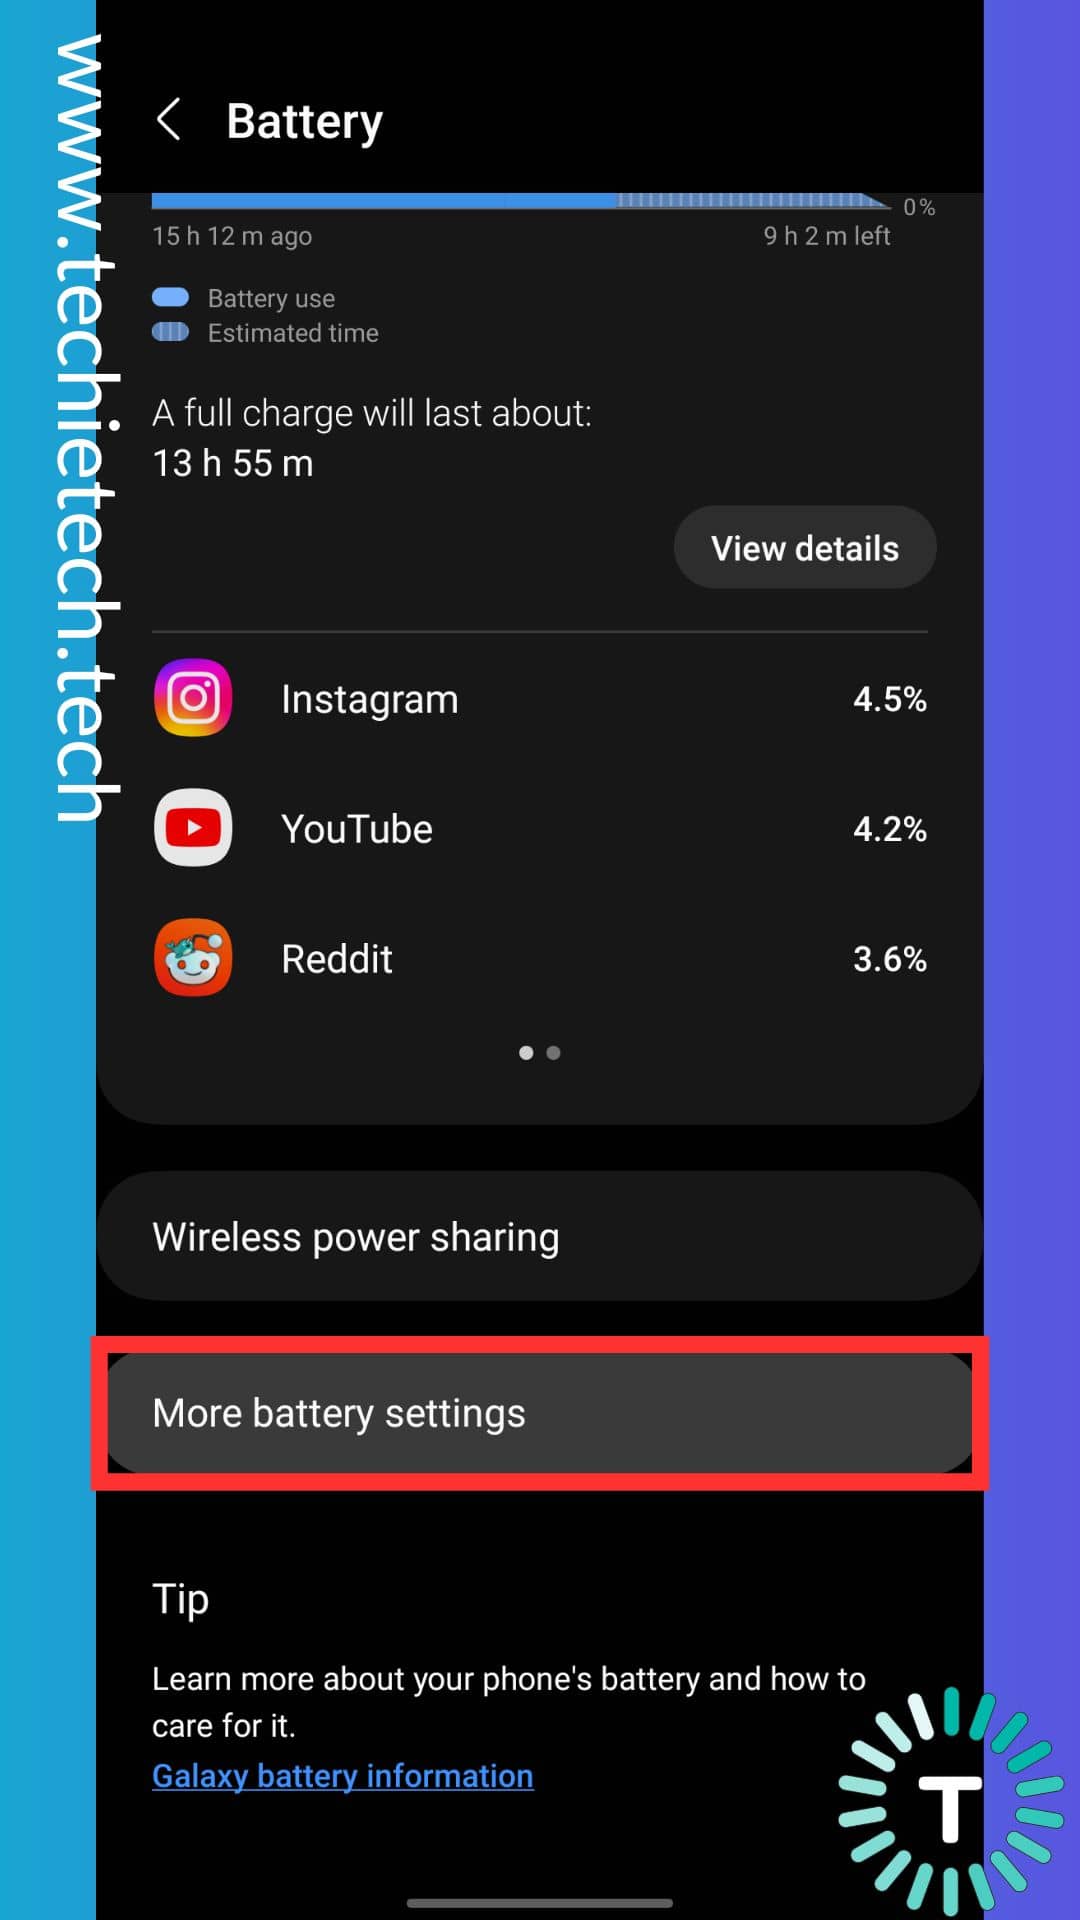 Tap on More Battery Settings